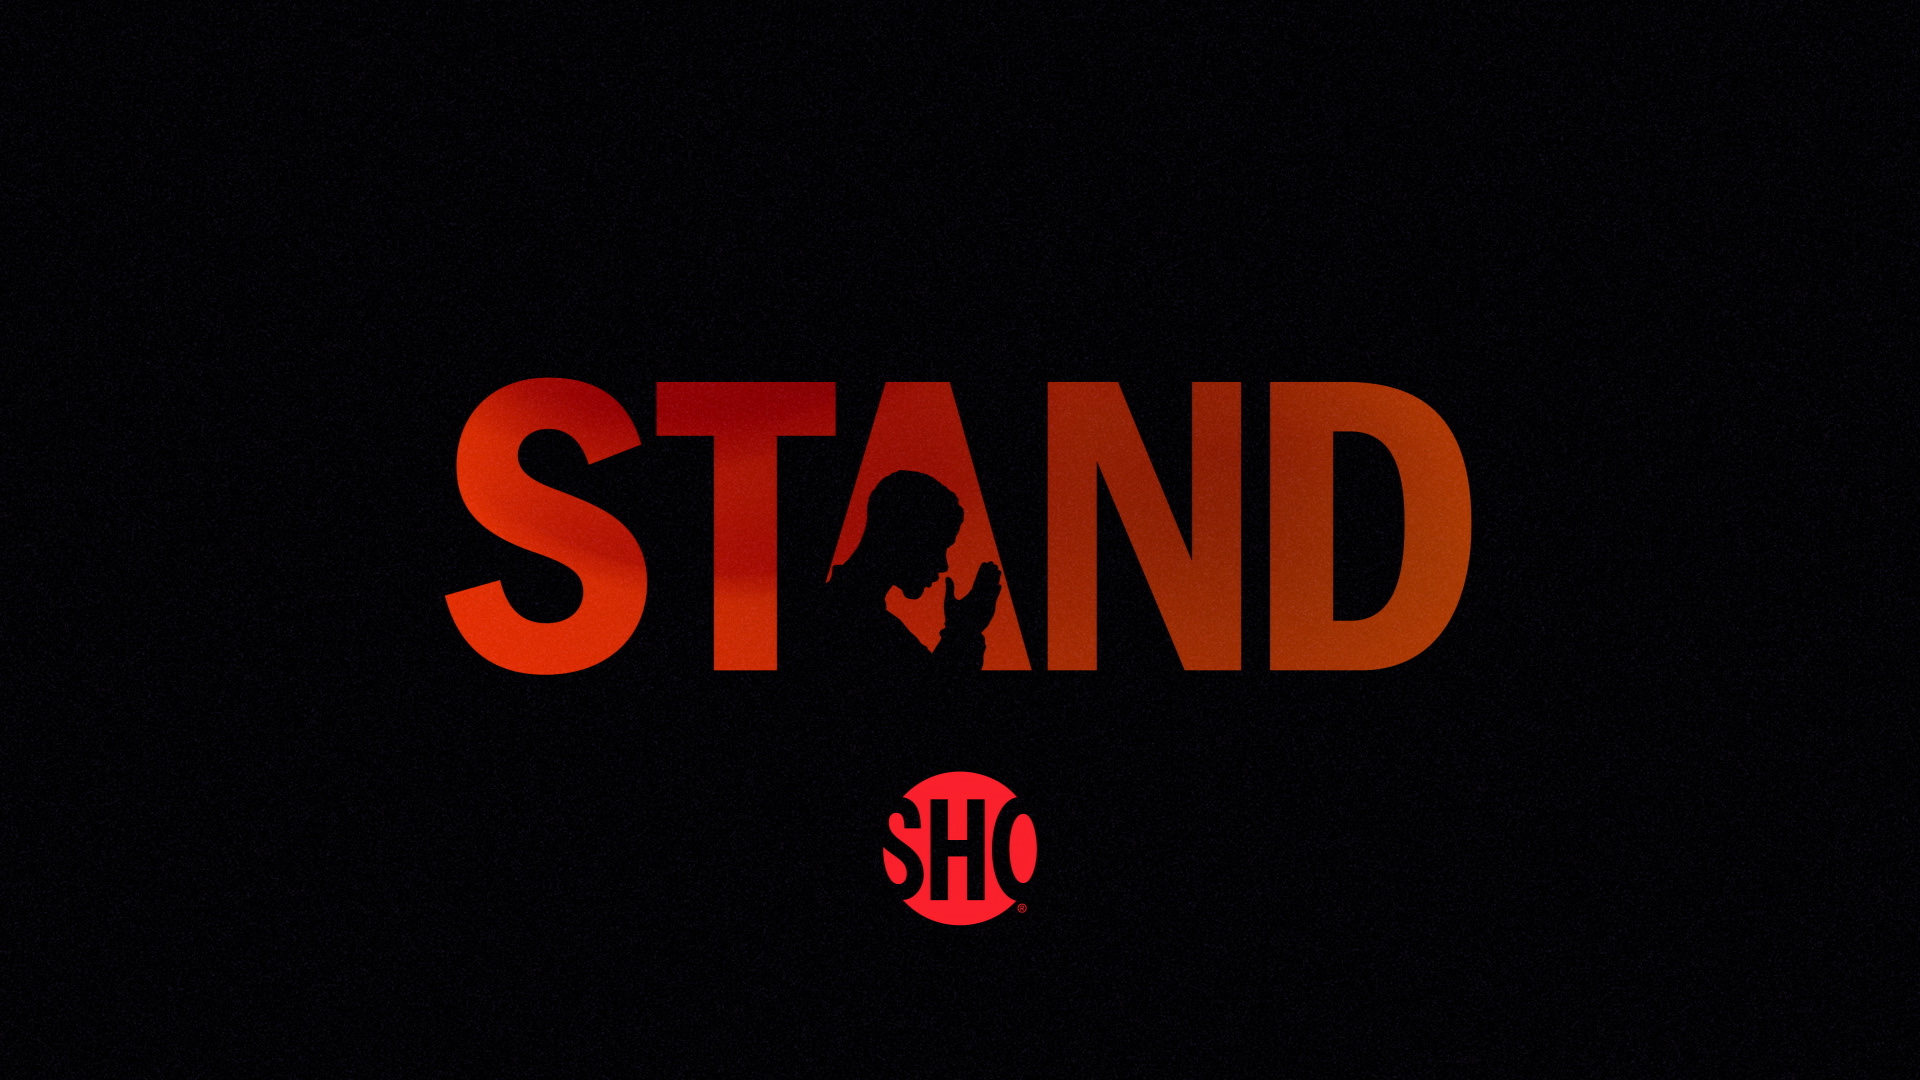 Showtime® Sports Documentary Films Premieres 'Stand' - About The Life Of Mahmoud  Abdul-Rauf